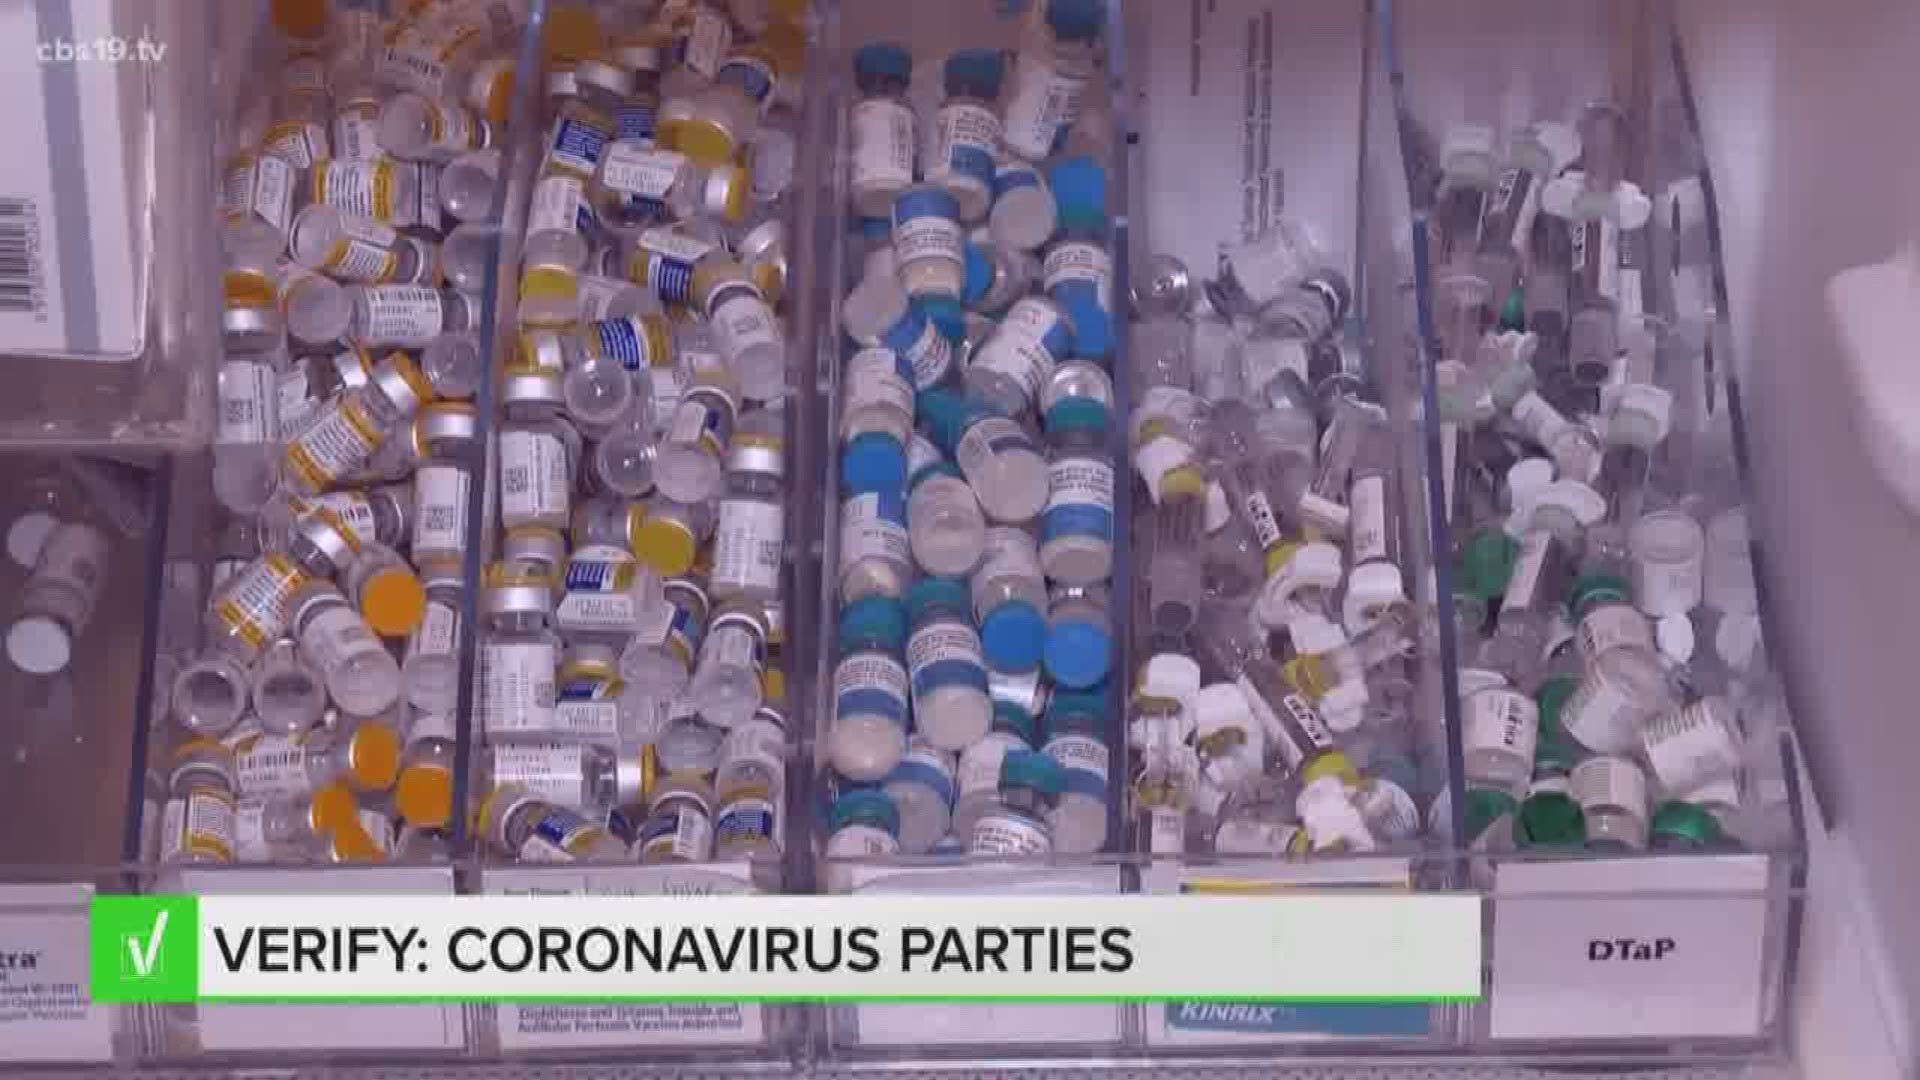 CBS19's David Lippman looks into whether a coronavirus party is a safe way to survive COVID-19.